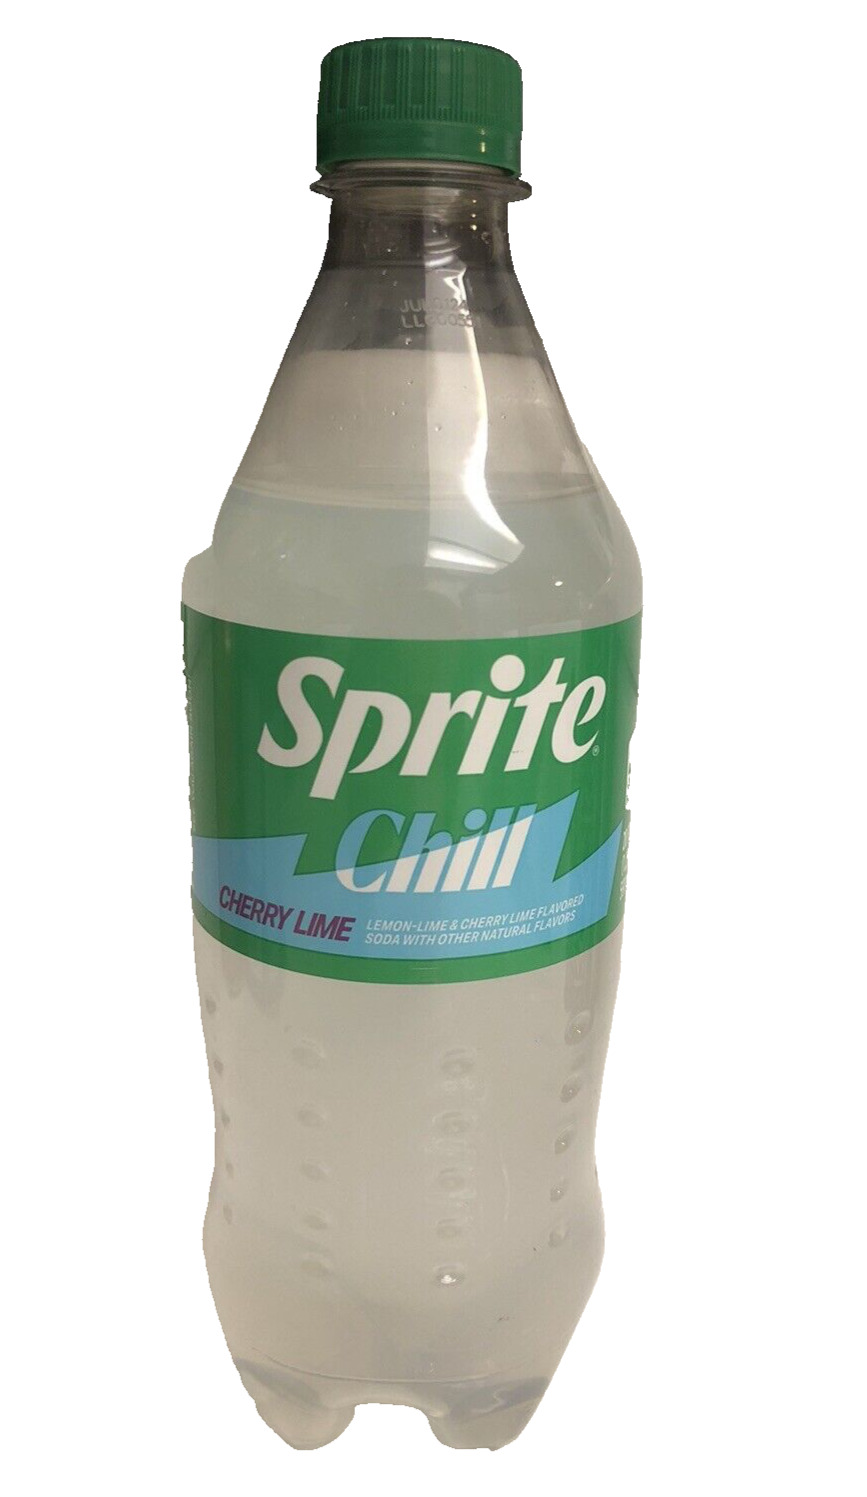 NEW LIMITED EDITION SPRITE CHILL CHERRY LIME FLAVORED SODA 1 FULL 20 FLOZ BOTTLE